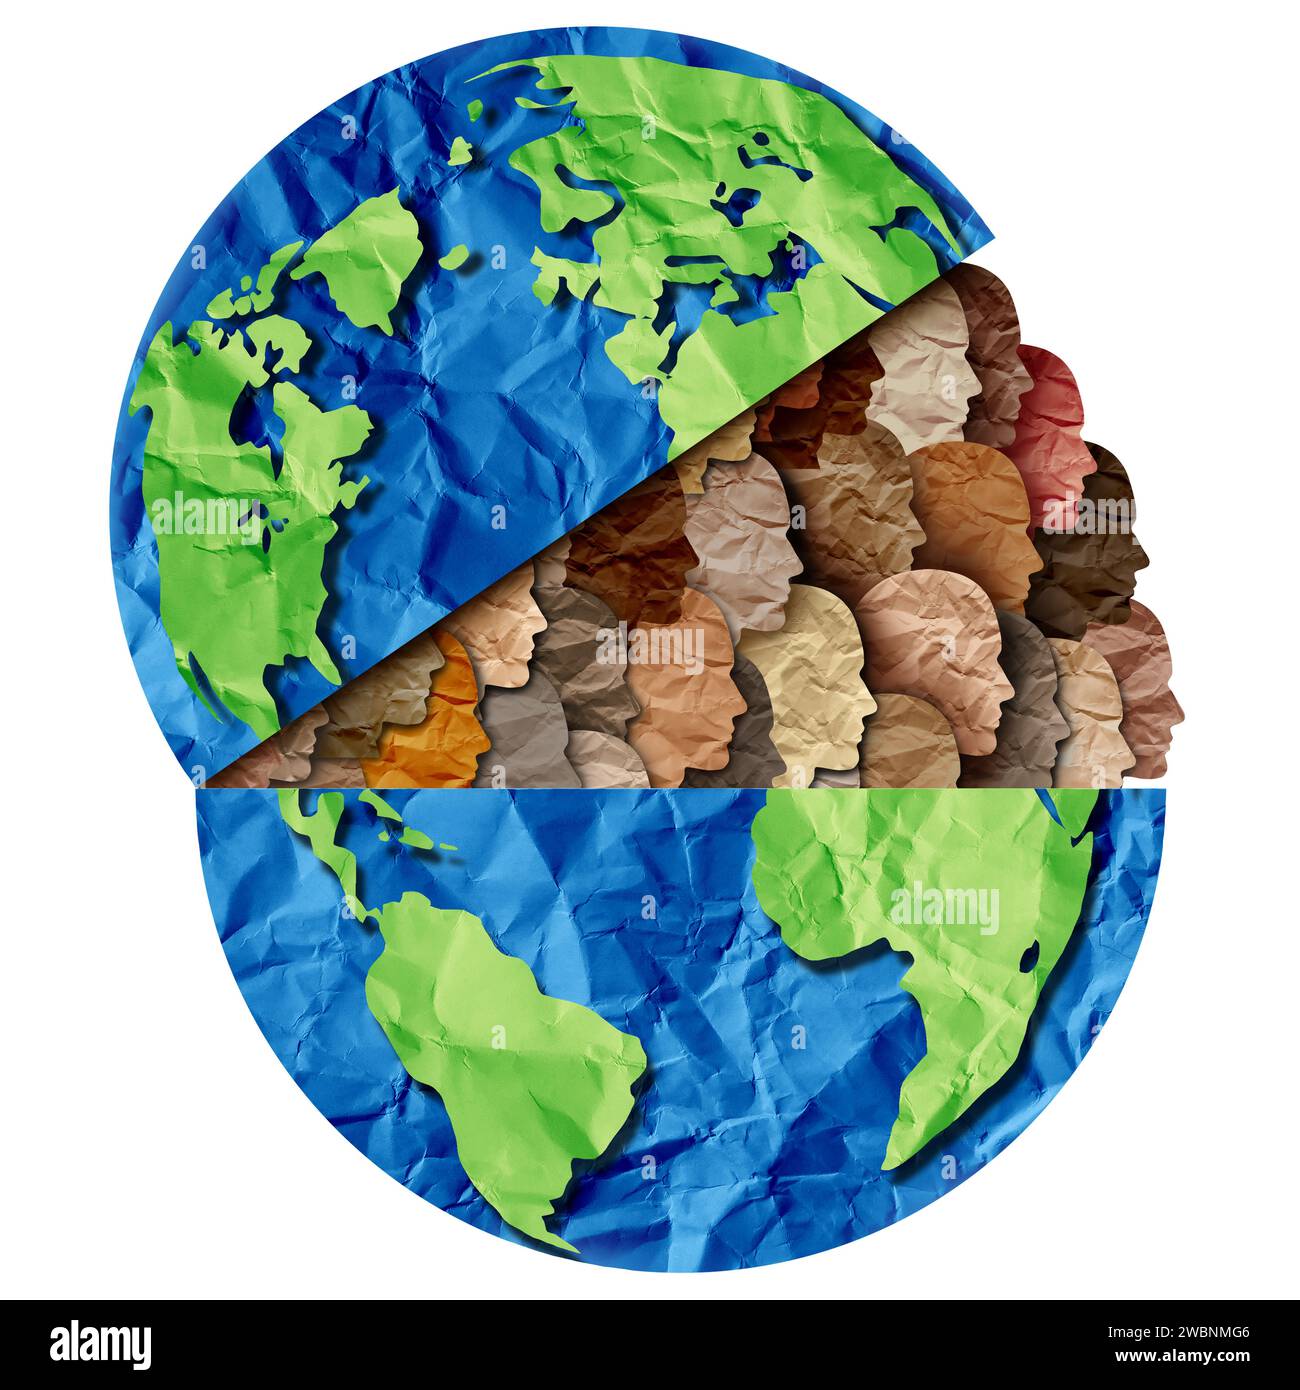 Planet Earth Diversity and Earth-day diversity and cultural celebration as diverse global cultures and multi-cultural unity. Stock Photo